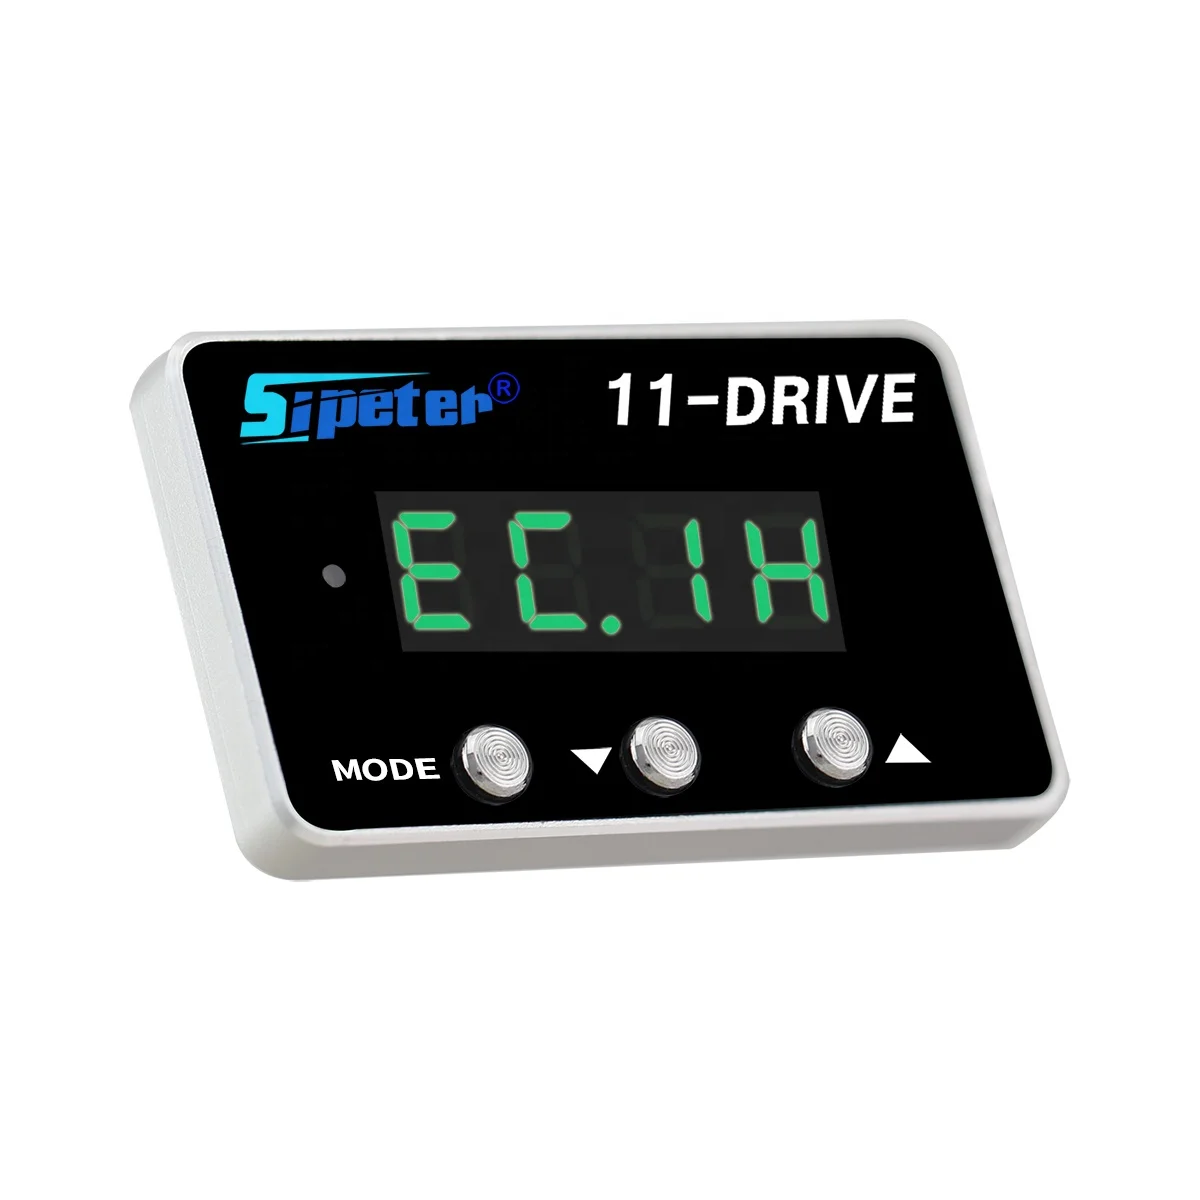 Automotive Electronic Throttle Accelerator Booster Controller Sipeter 11 Drive Factory Supply for Japan Vehicles Factory Supply